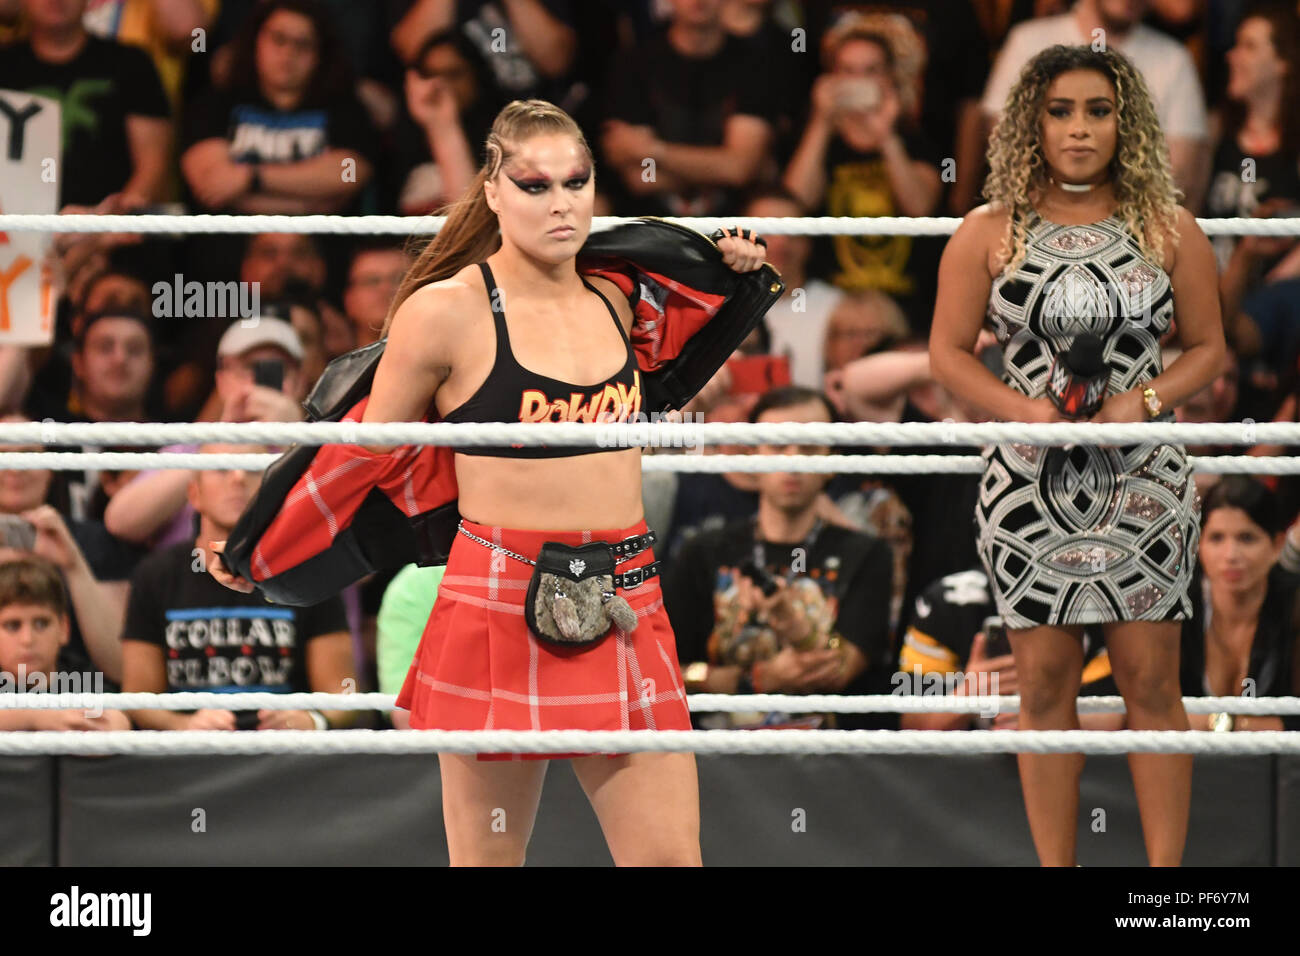 Brooklyn, NY, USA. 19th Aug, 2018. Ronda Rousey at WWE SummerSlam 2018 at The Barclays Center in Brooklyn, New York City on August 19, 2018. Credit: George Napolitano/Media Punch/Alamy Live News Stock Photo